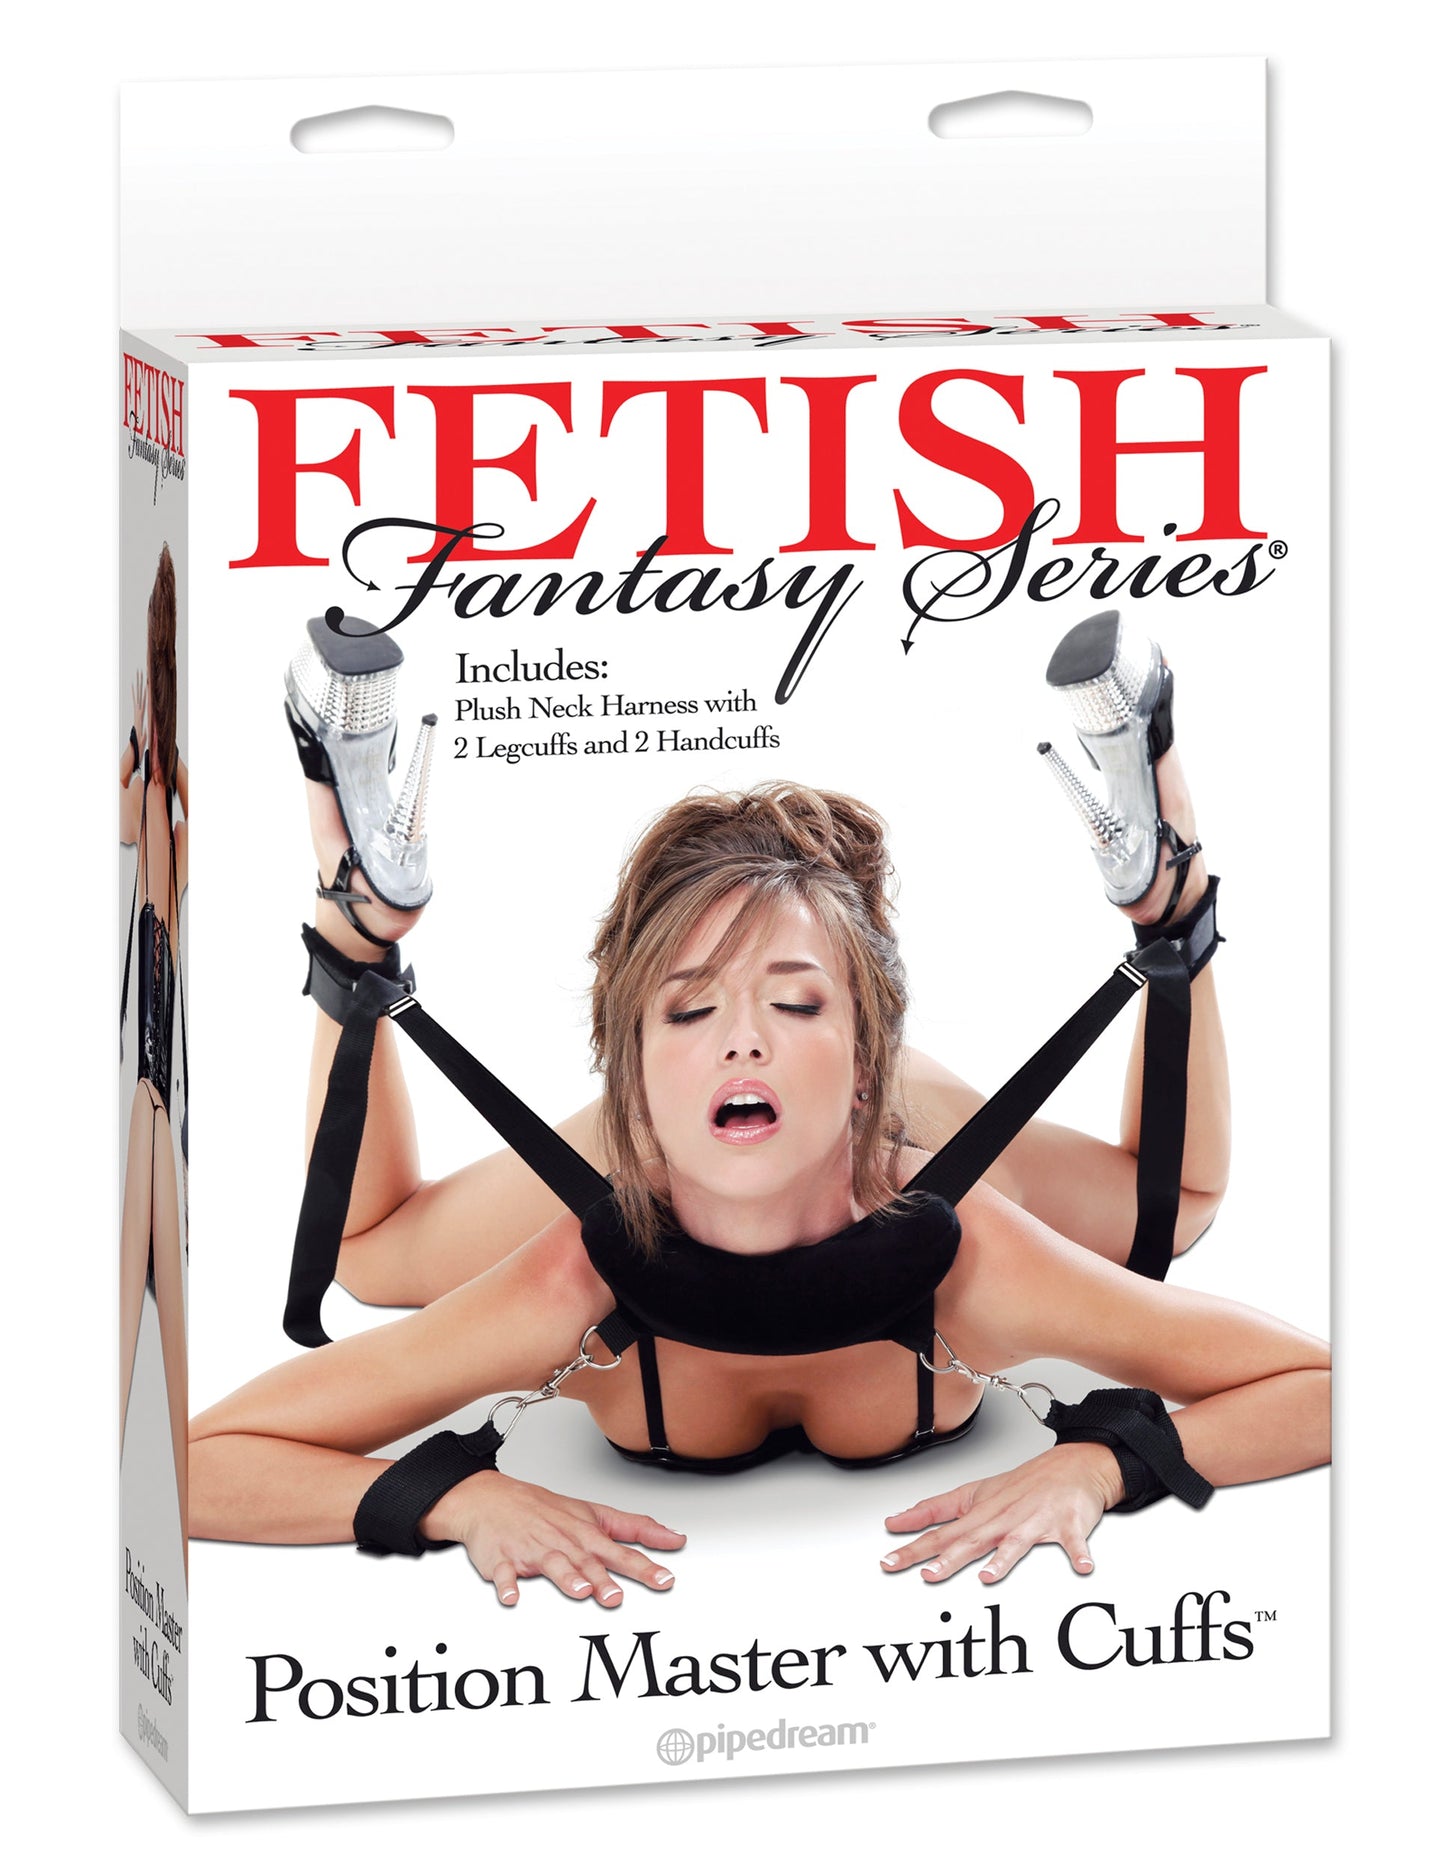 Fetish Fantasy Series Position Master with Cuffs by Pipedream